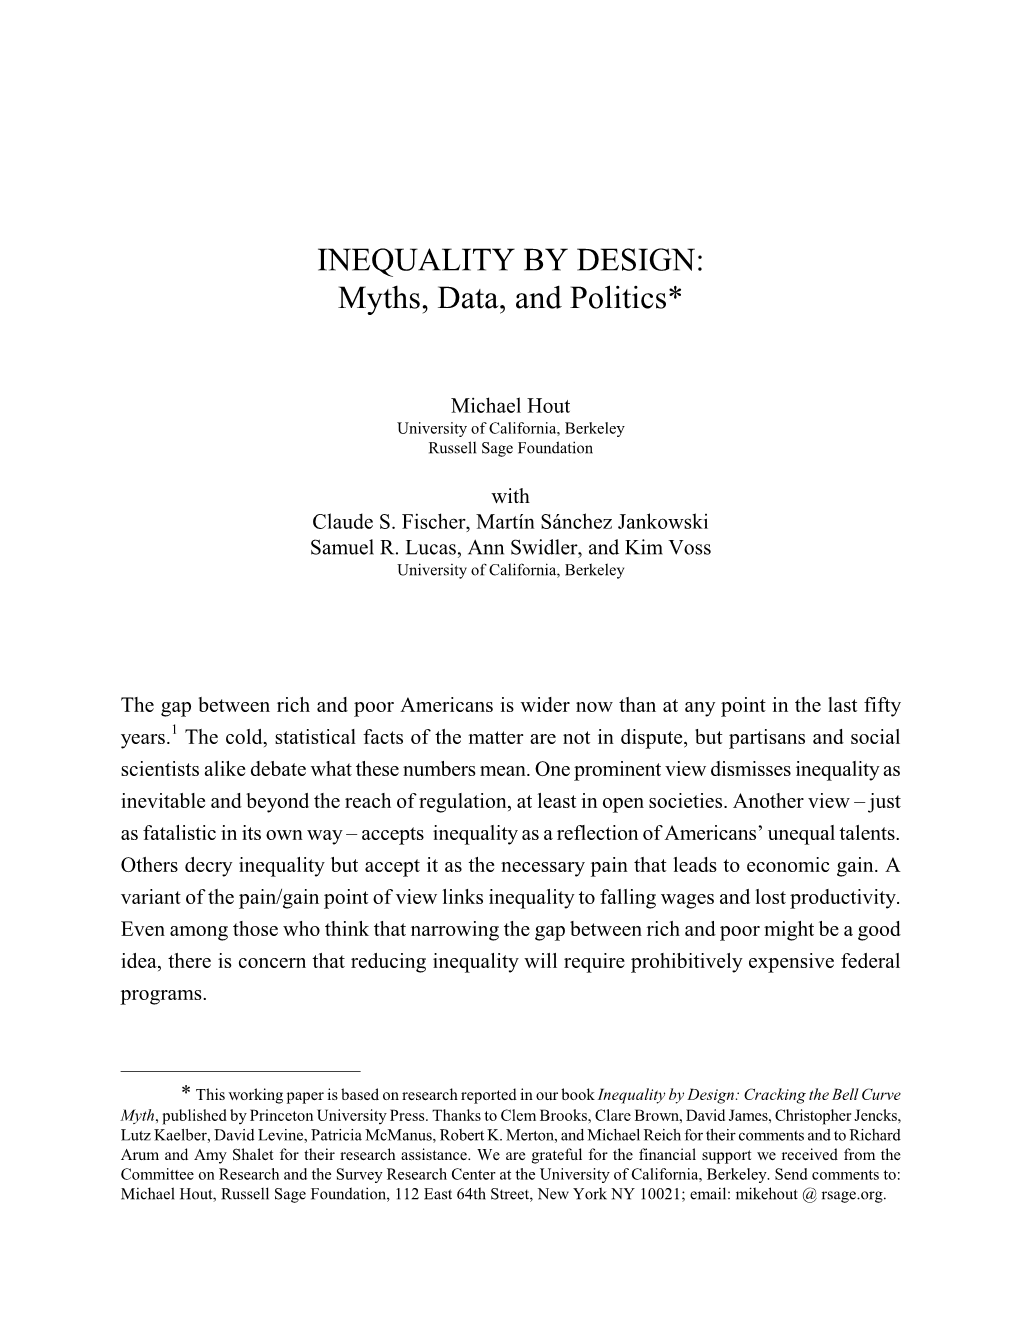 INEQUALITY by DESIGN: Myths, Data, and Politics*